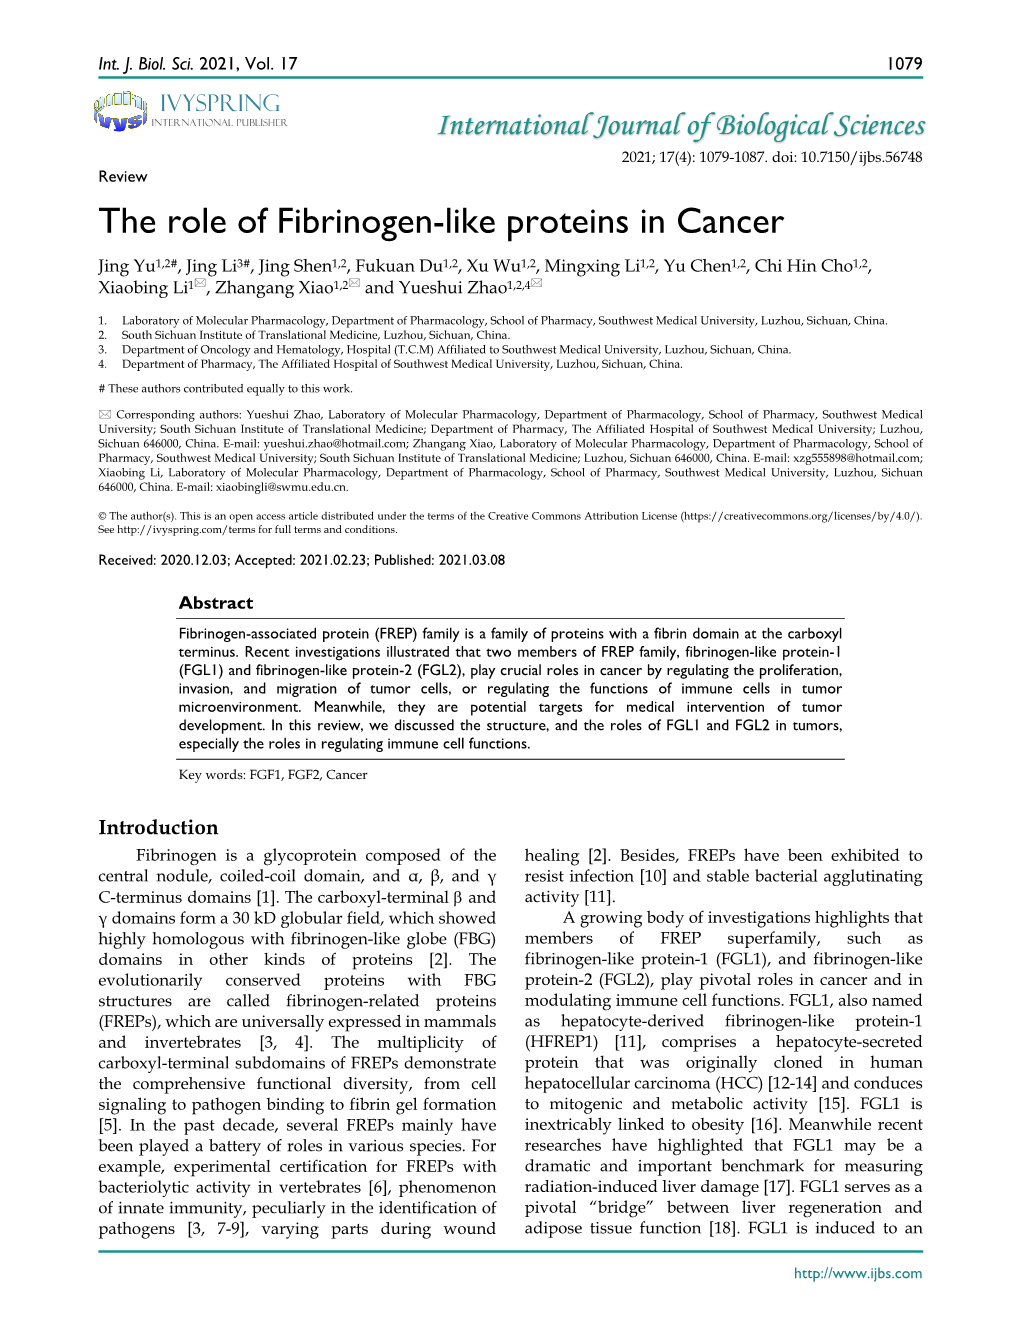 The Role of Fibrinogen-Like Proteins in Cancer